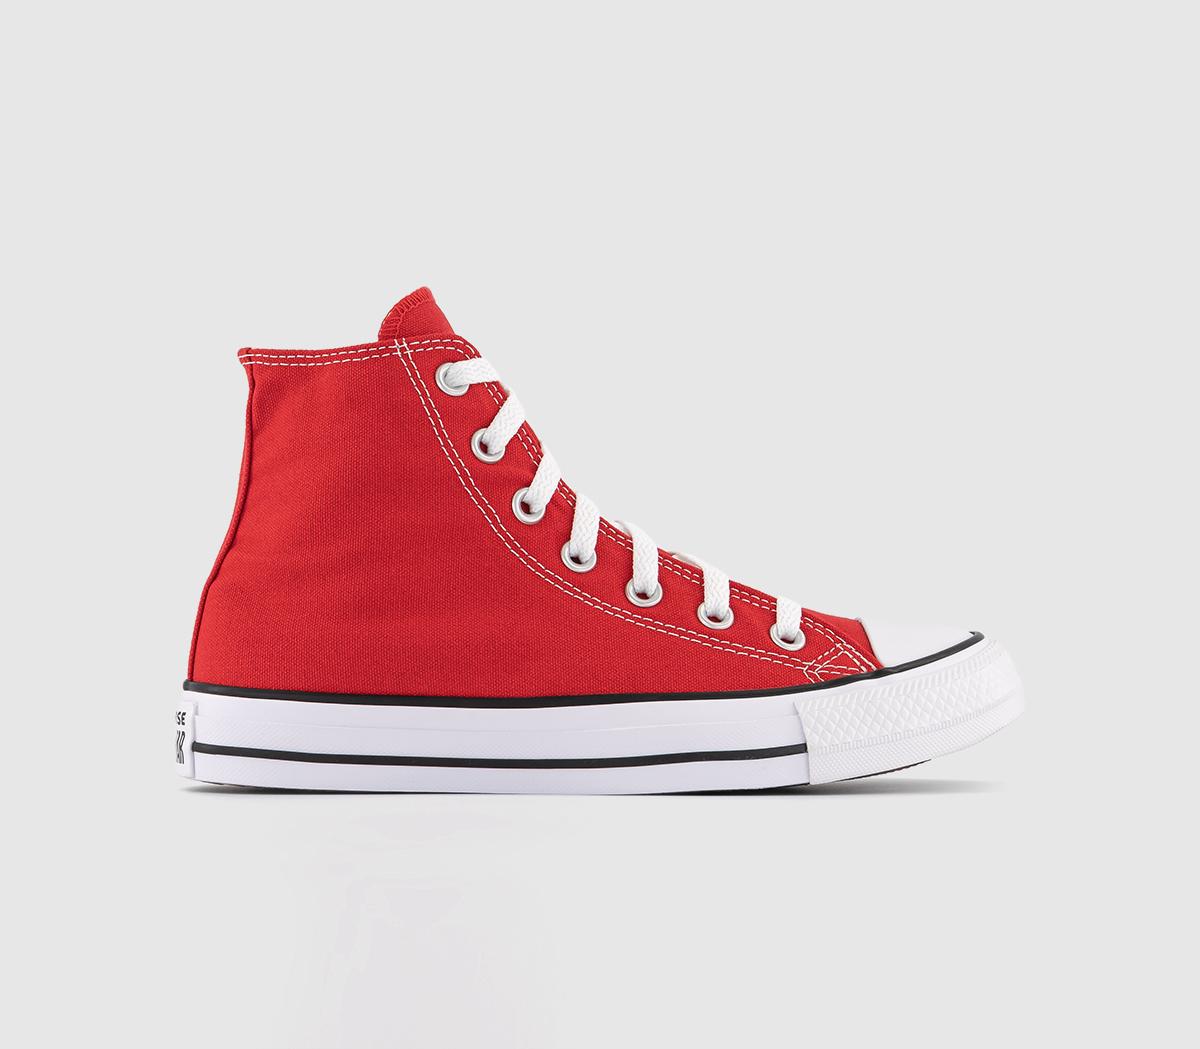 Converse All Star Hi Trainers Red Canvas - Unisex Sports